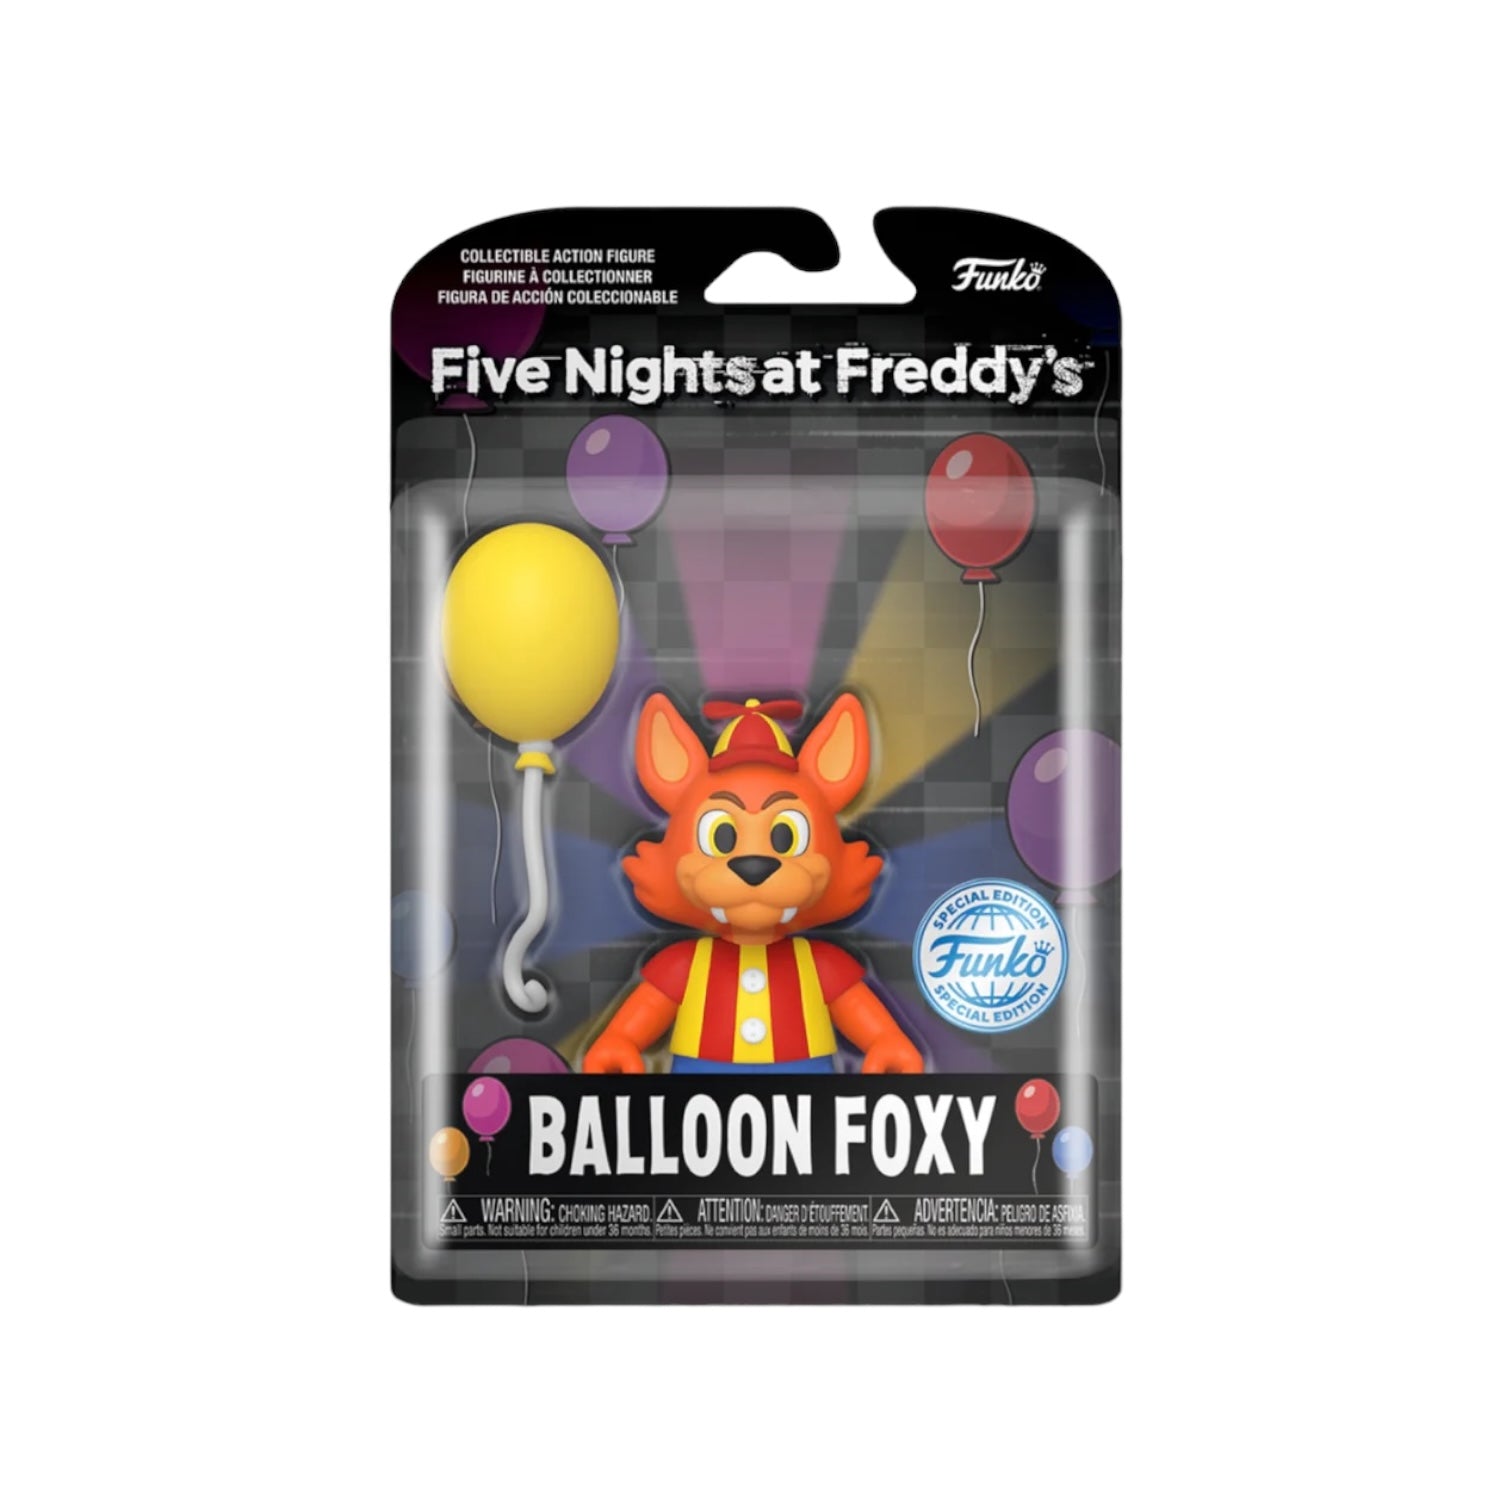 Balloon Foxy Funko Action Figure Five Nights at Freddy’s - Special Edition